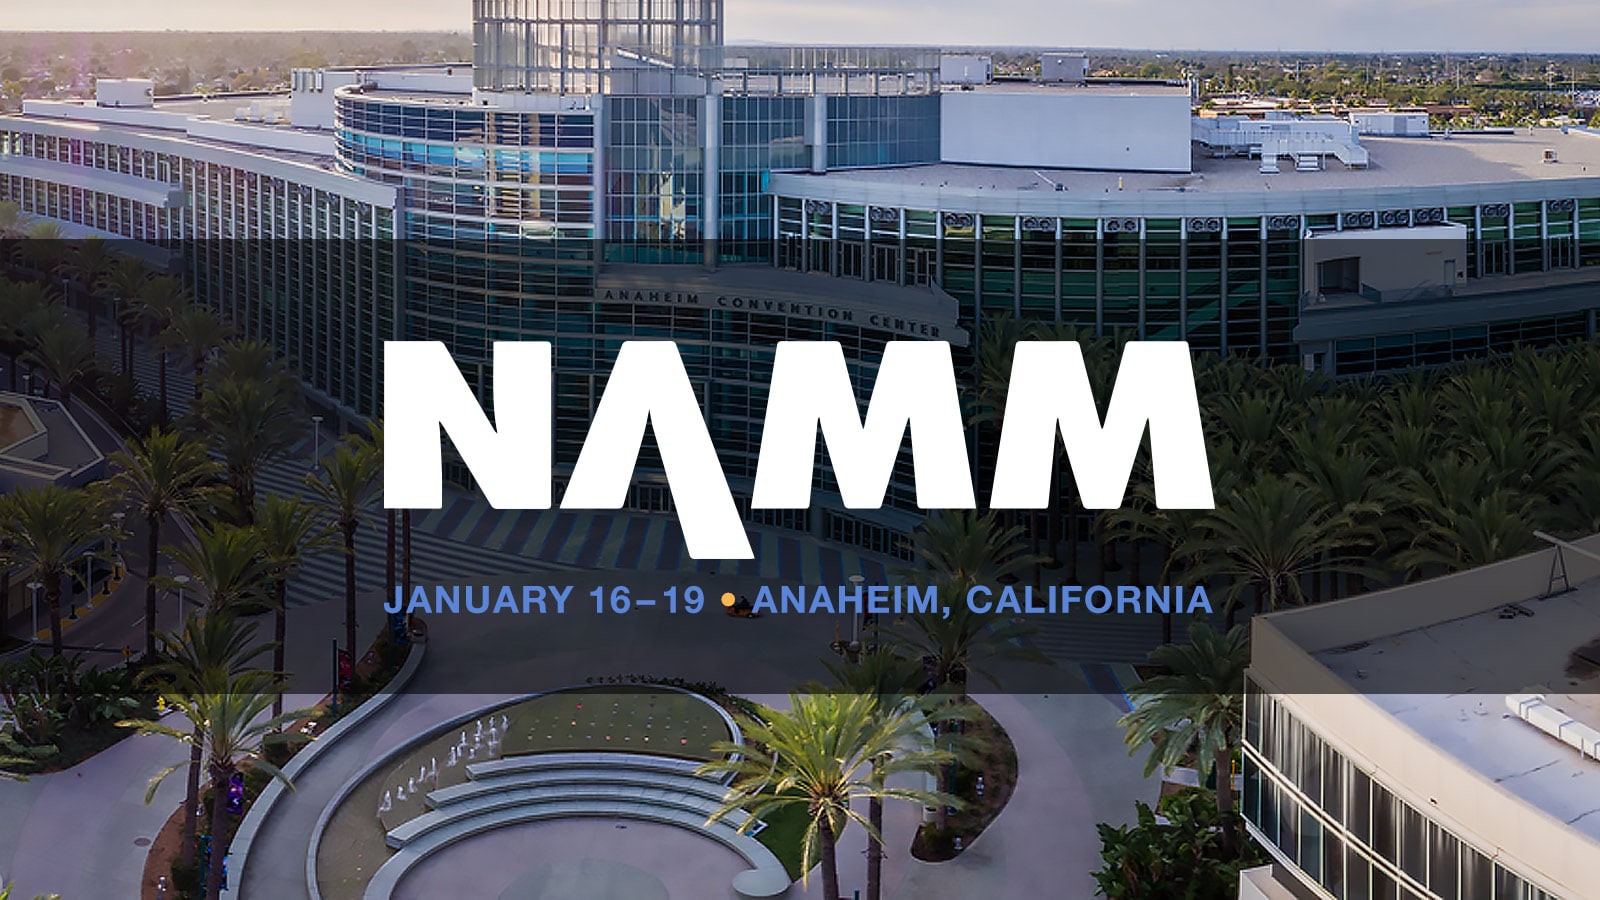 Meyer Sound Expands Footprint and Extends Hospitality at NAMM 2020